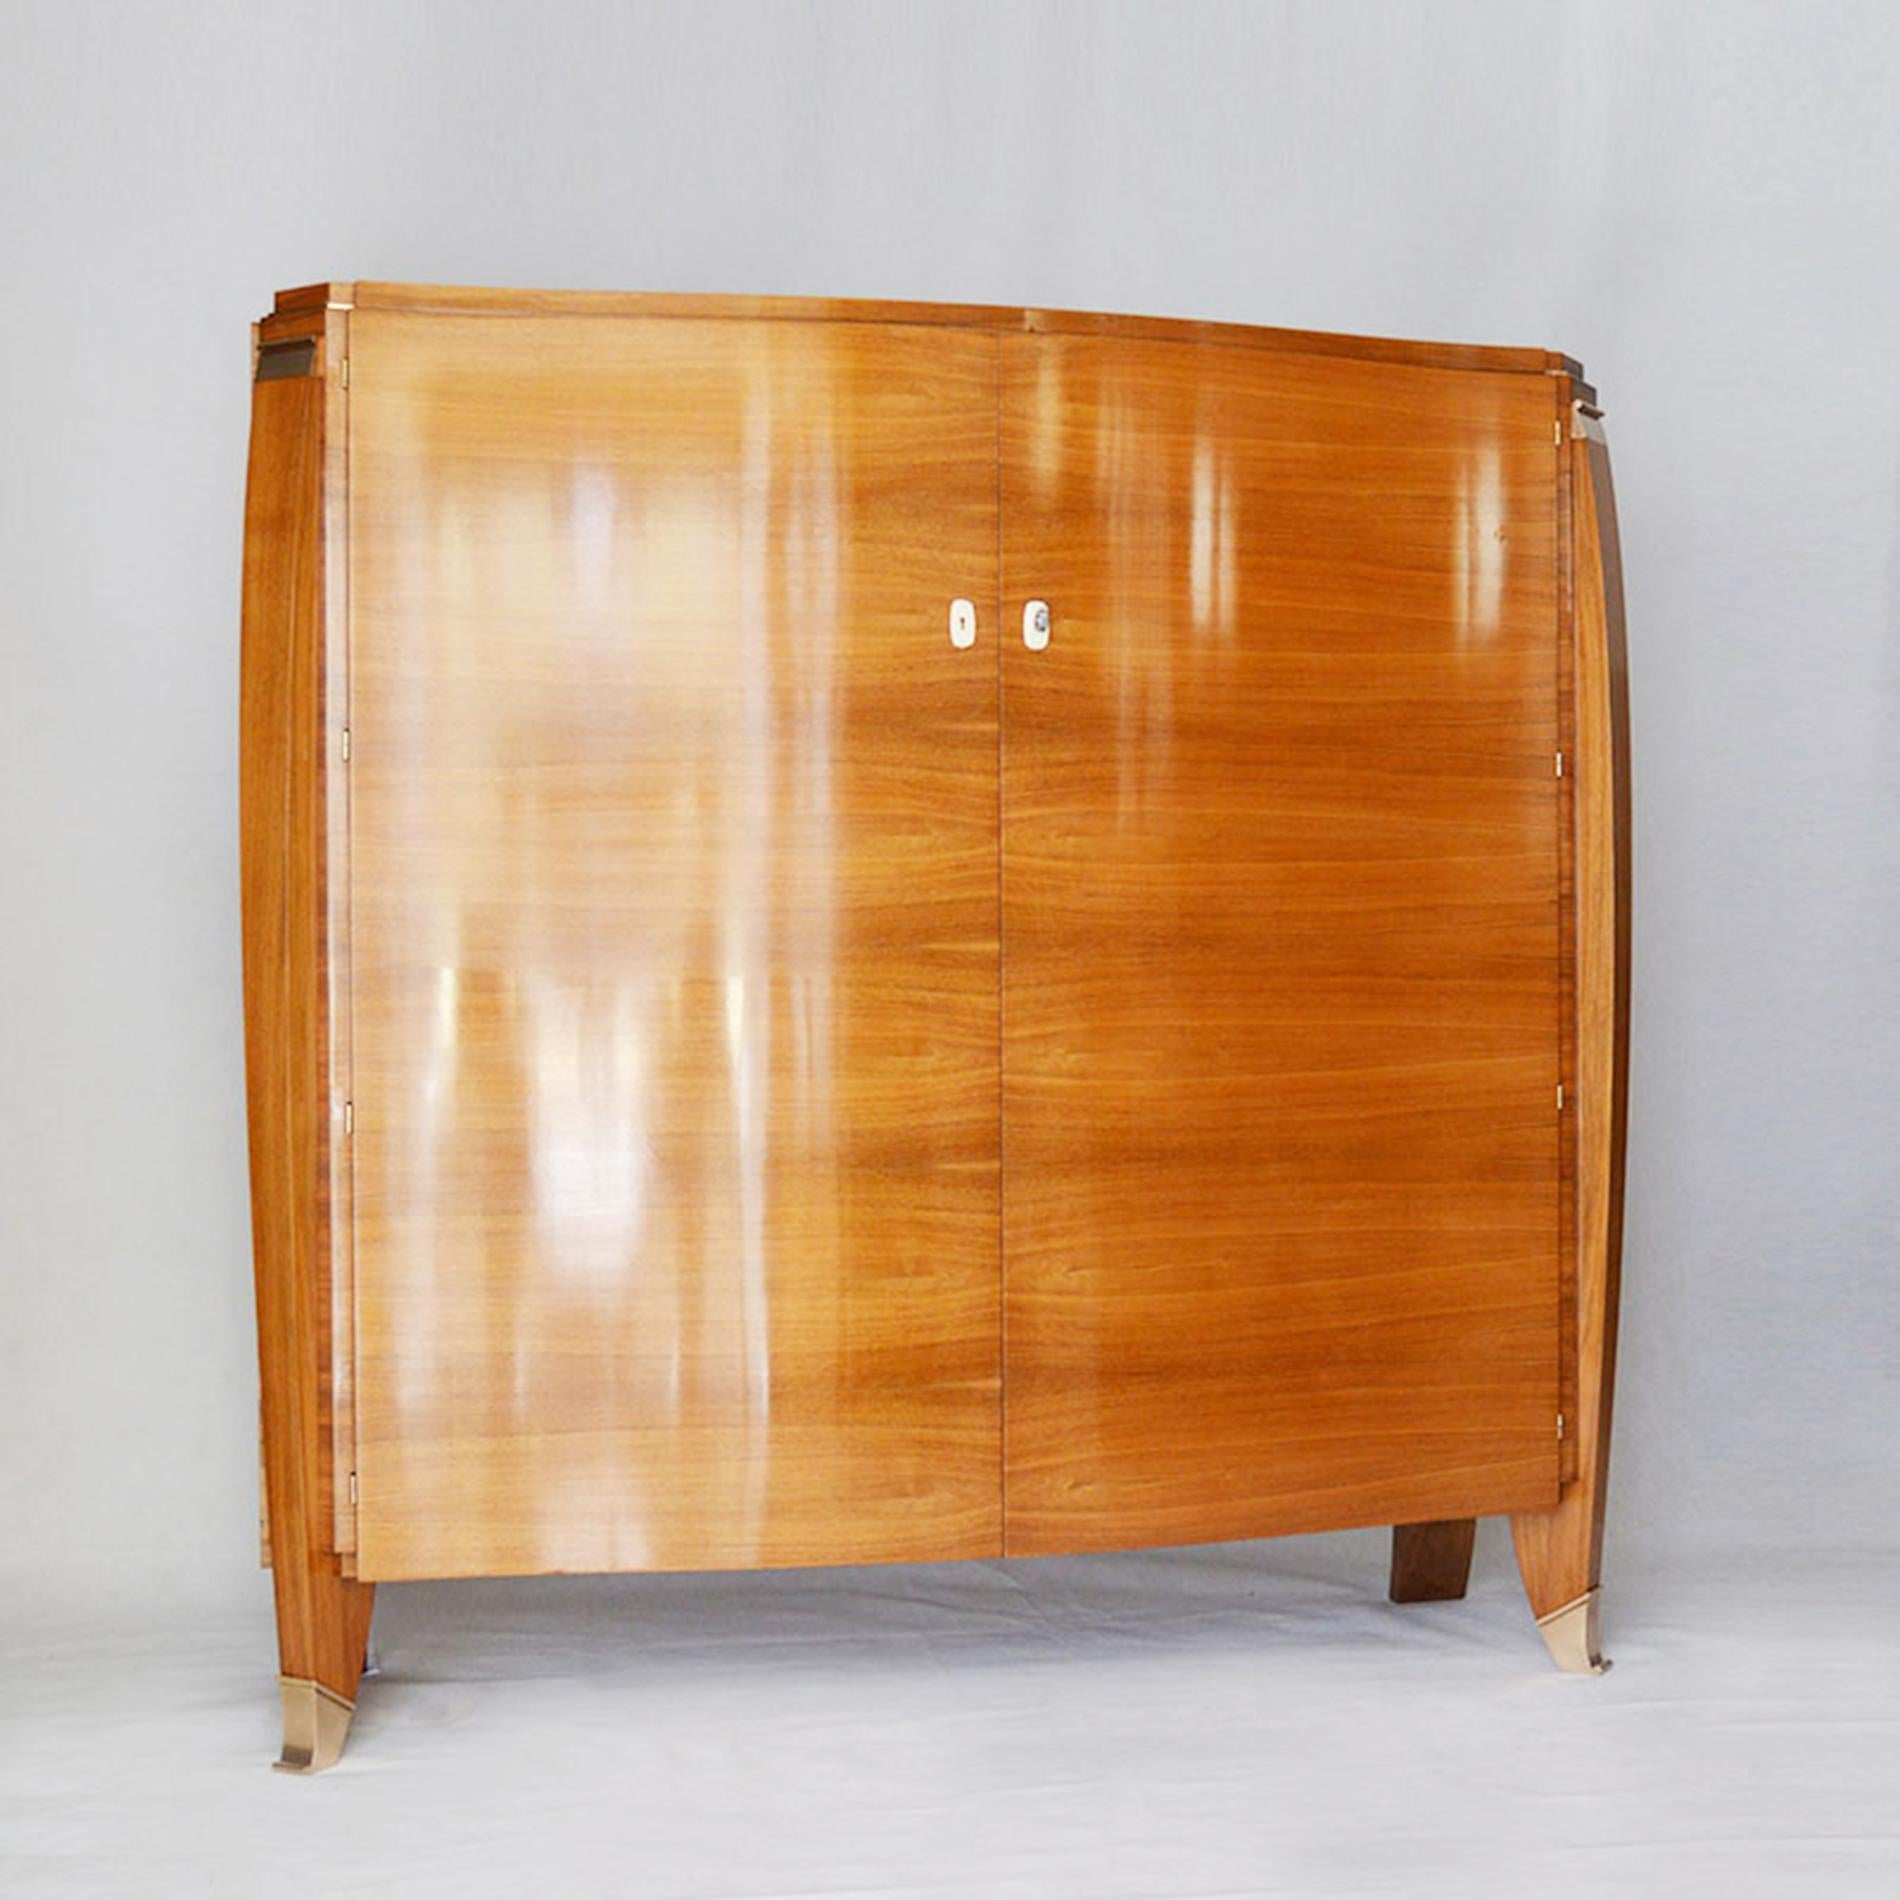 Large Art Deco walnut cabinet with bronze applications design by Maurice Rinck
Furniture designed by Maurice Rinck, France,
circa 1930
Good vintage condition
Documentation: attached 